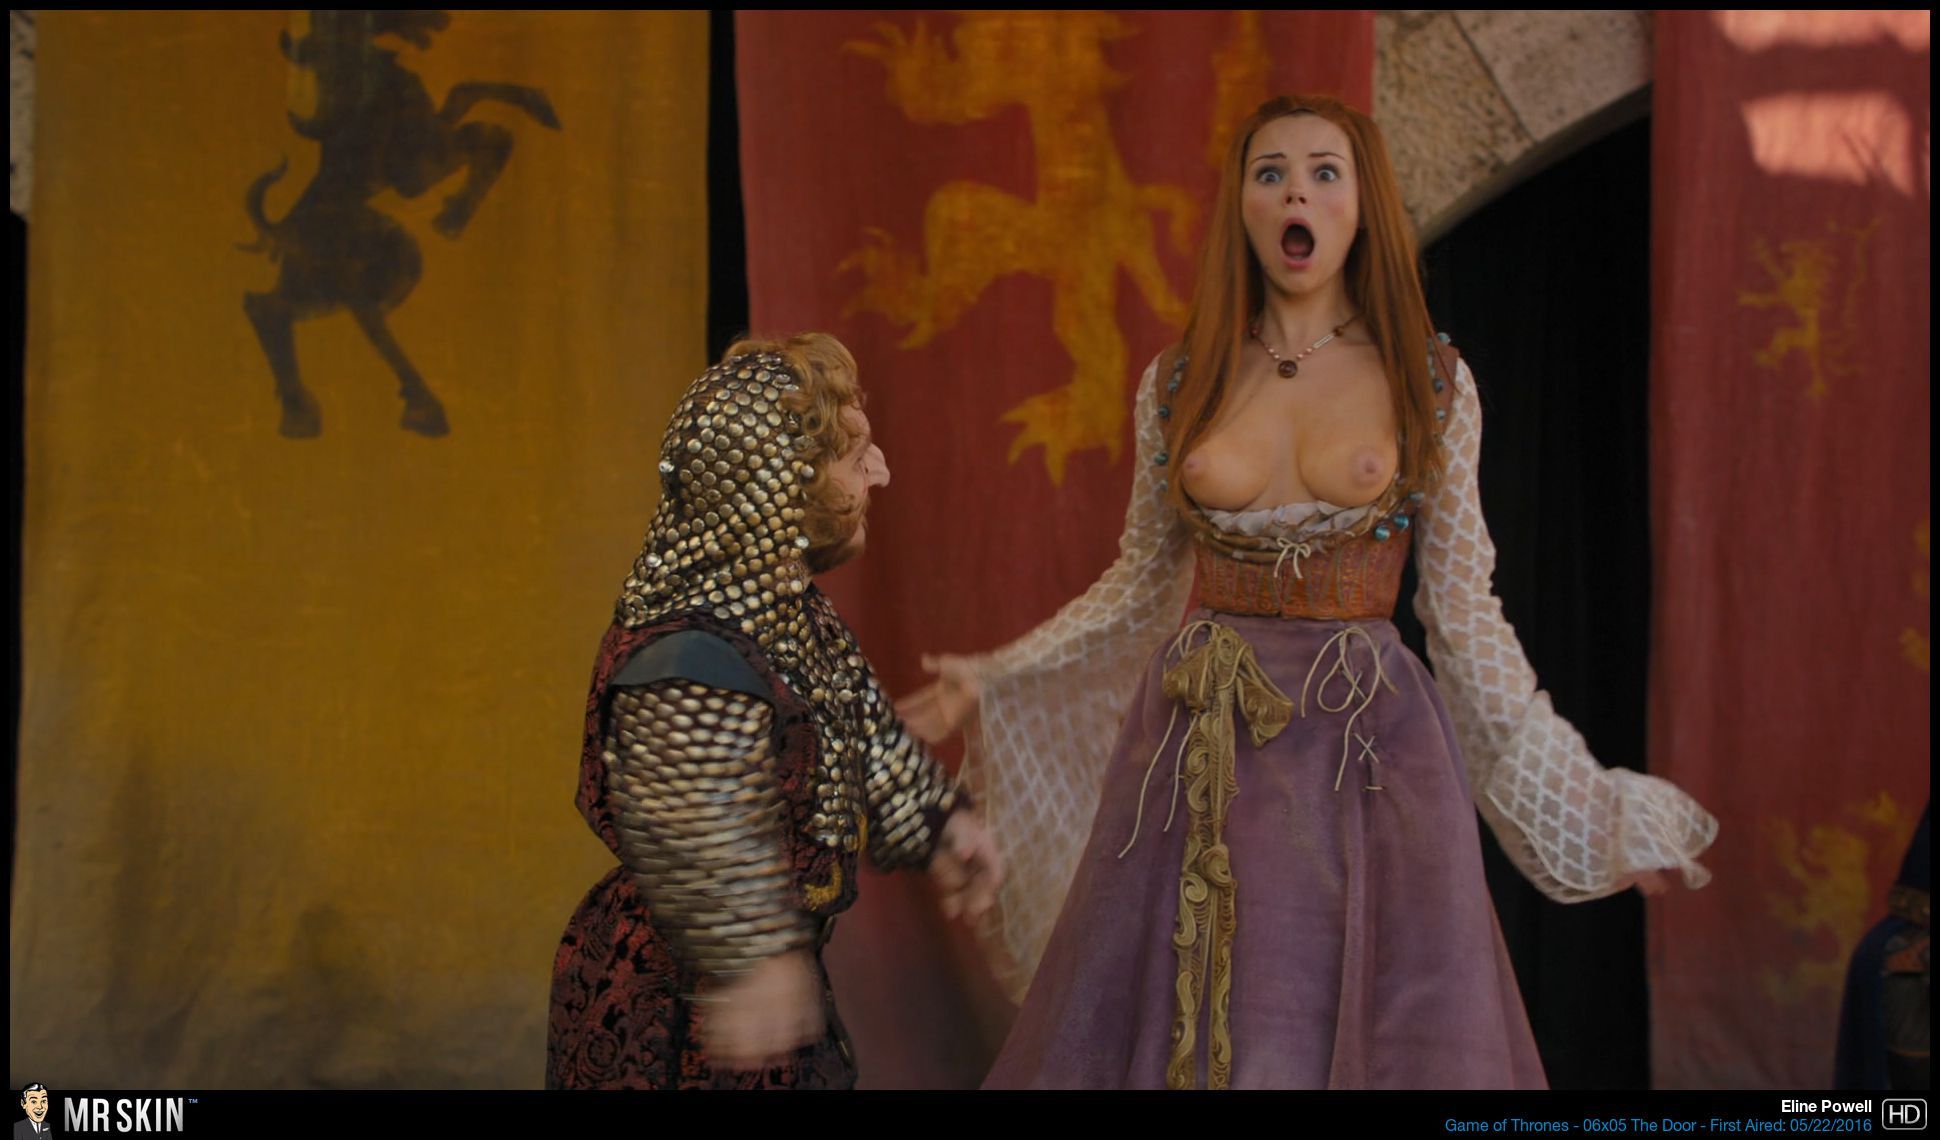 Game If Thrones Nude shemale cartoon